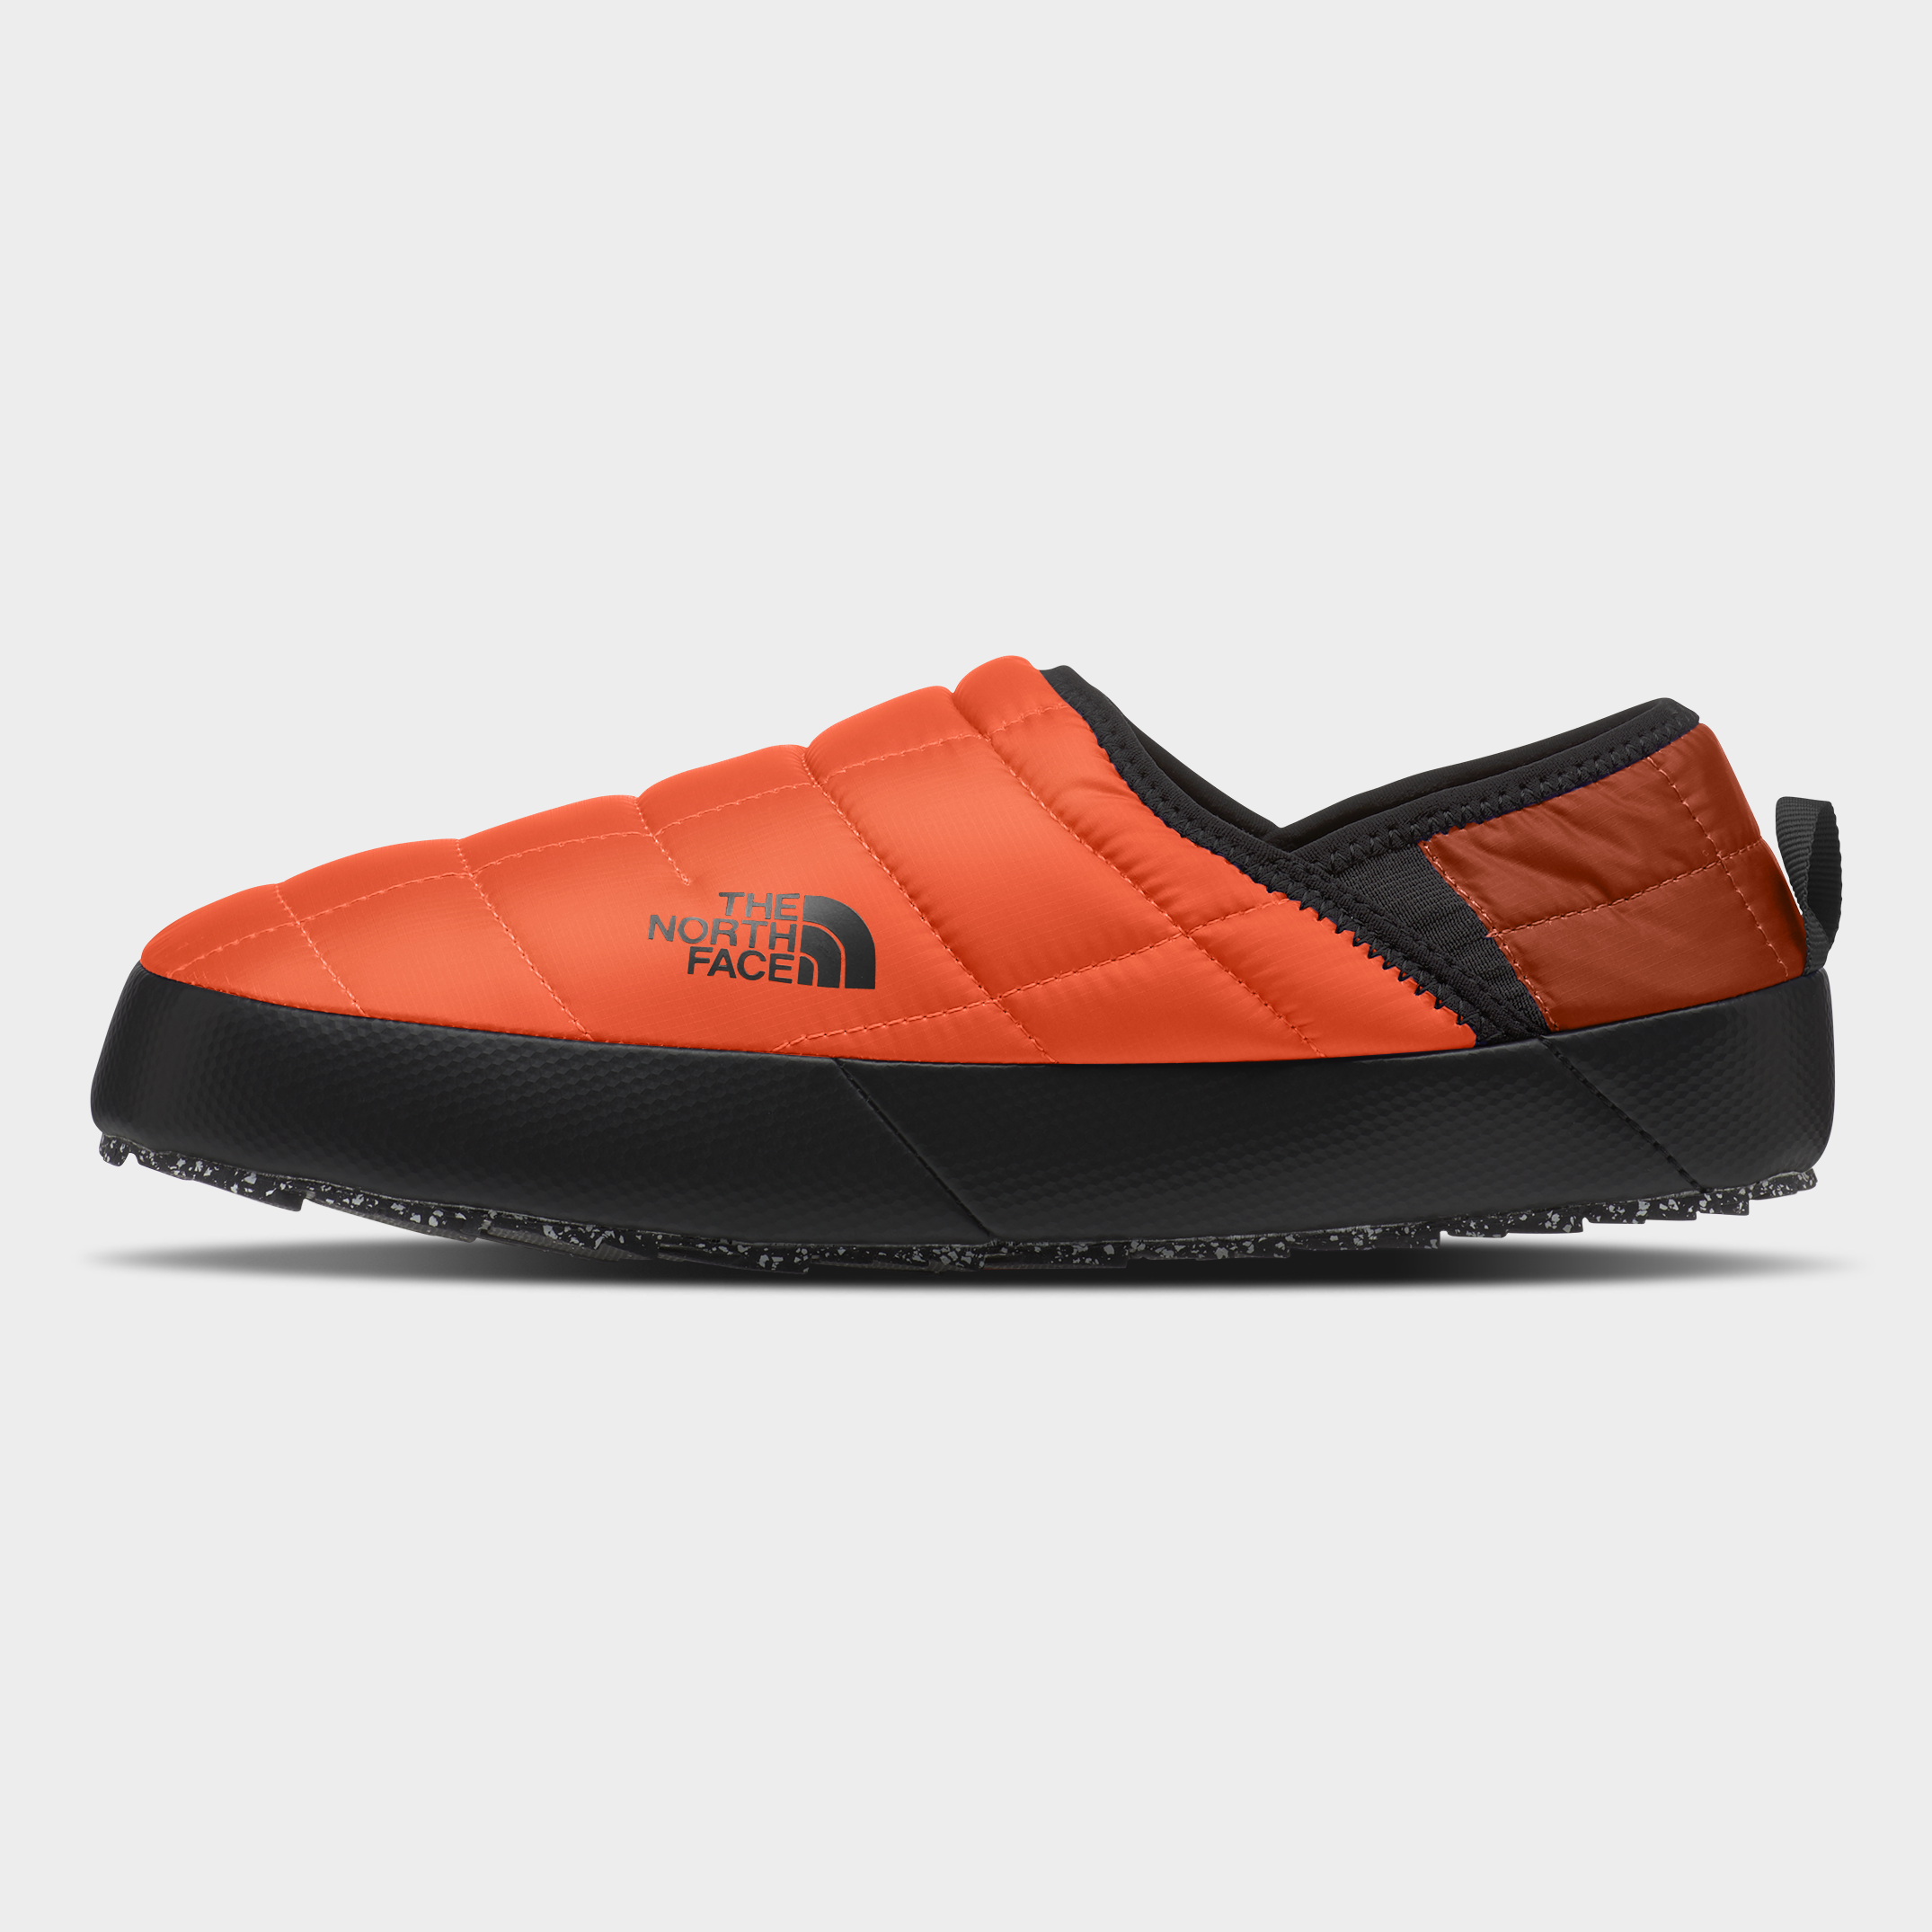 TNF THERMOBALL TRACTION MULE V